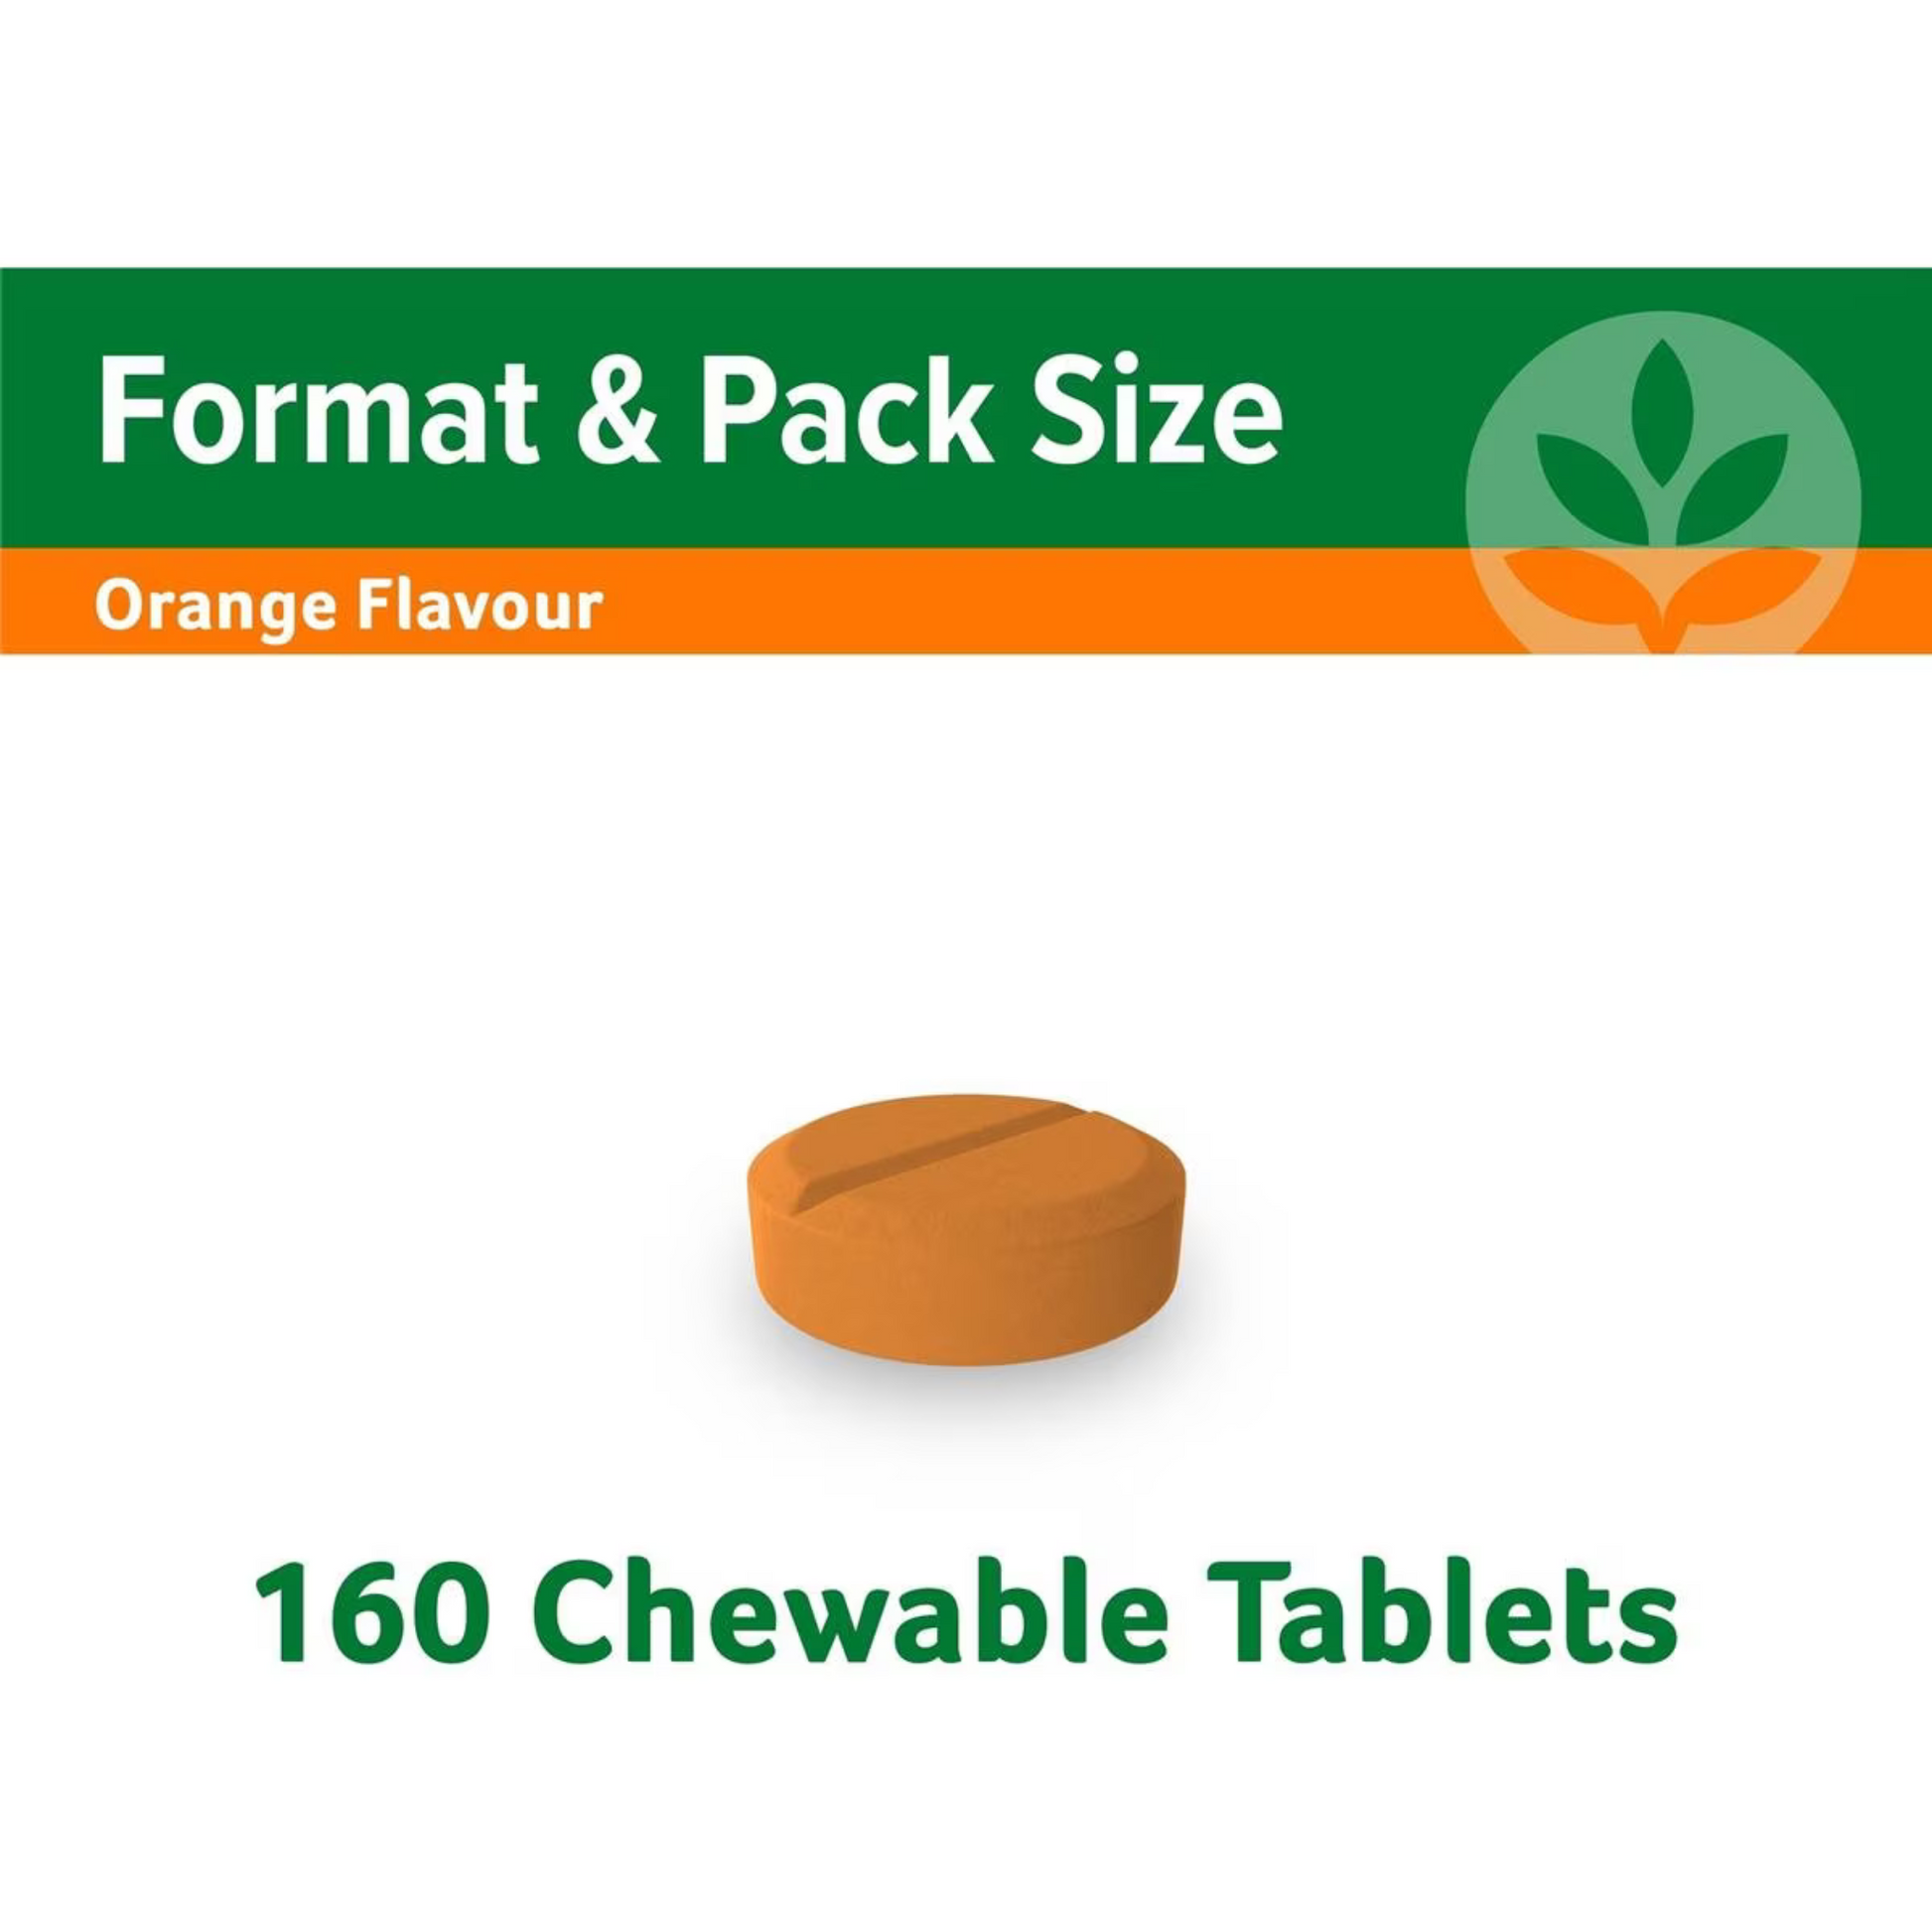 Cenovis Sugarless Vitamin C Chewable 500mg are orange flavoured chewable tablet which ensure regular intake of Vitamin C. Relieves severity of common cold symptoms. Best imported foreign genuine authentic real Australian Aussie premium quality health dietary supplement cheap price in Dhaka Chittagong Sylhet Bangladesh.